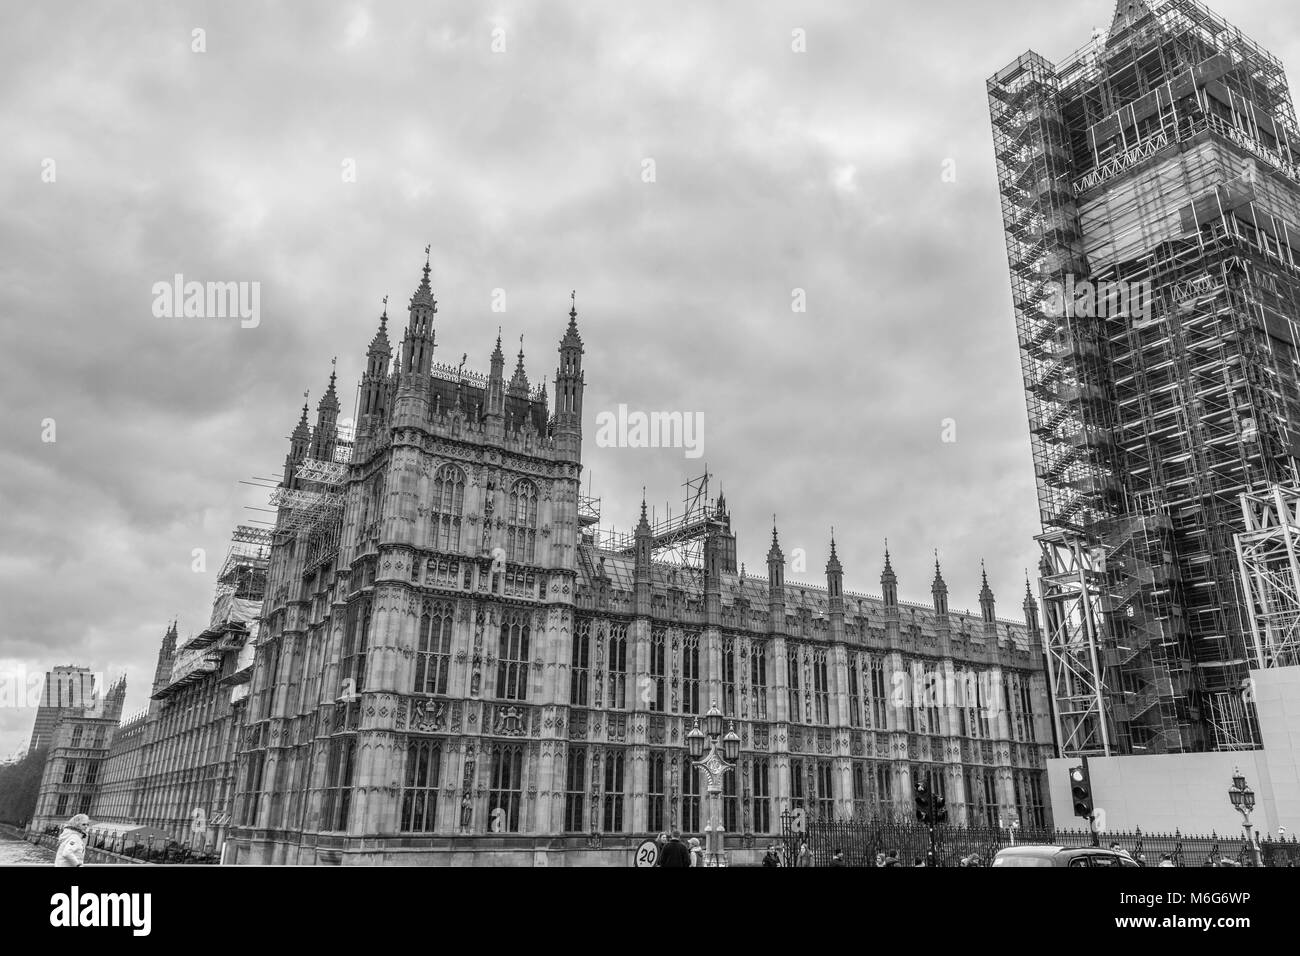 London, United Kingdom, February 17, 2018: Westminster bridge and big ben repain construction with the house of parliament in view, wintery skies Stock Photo